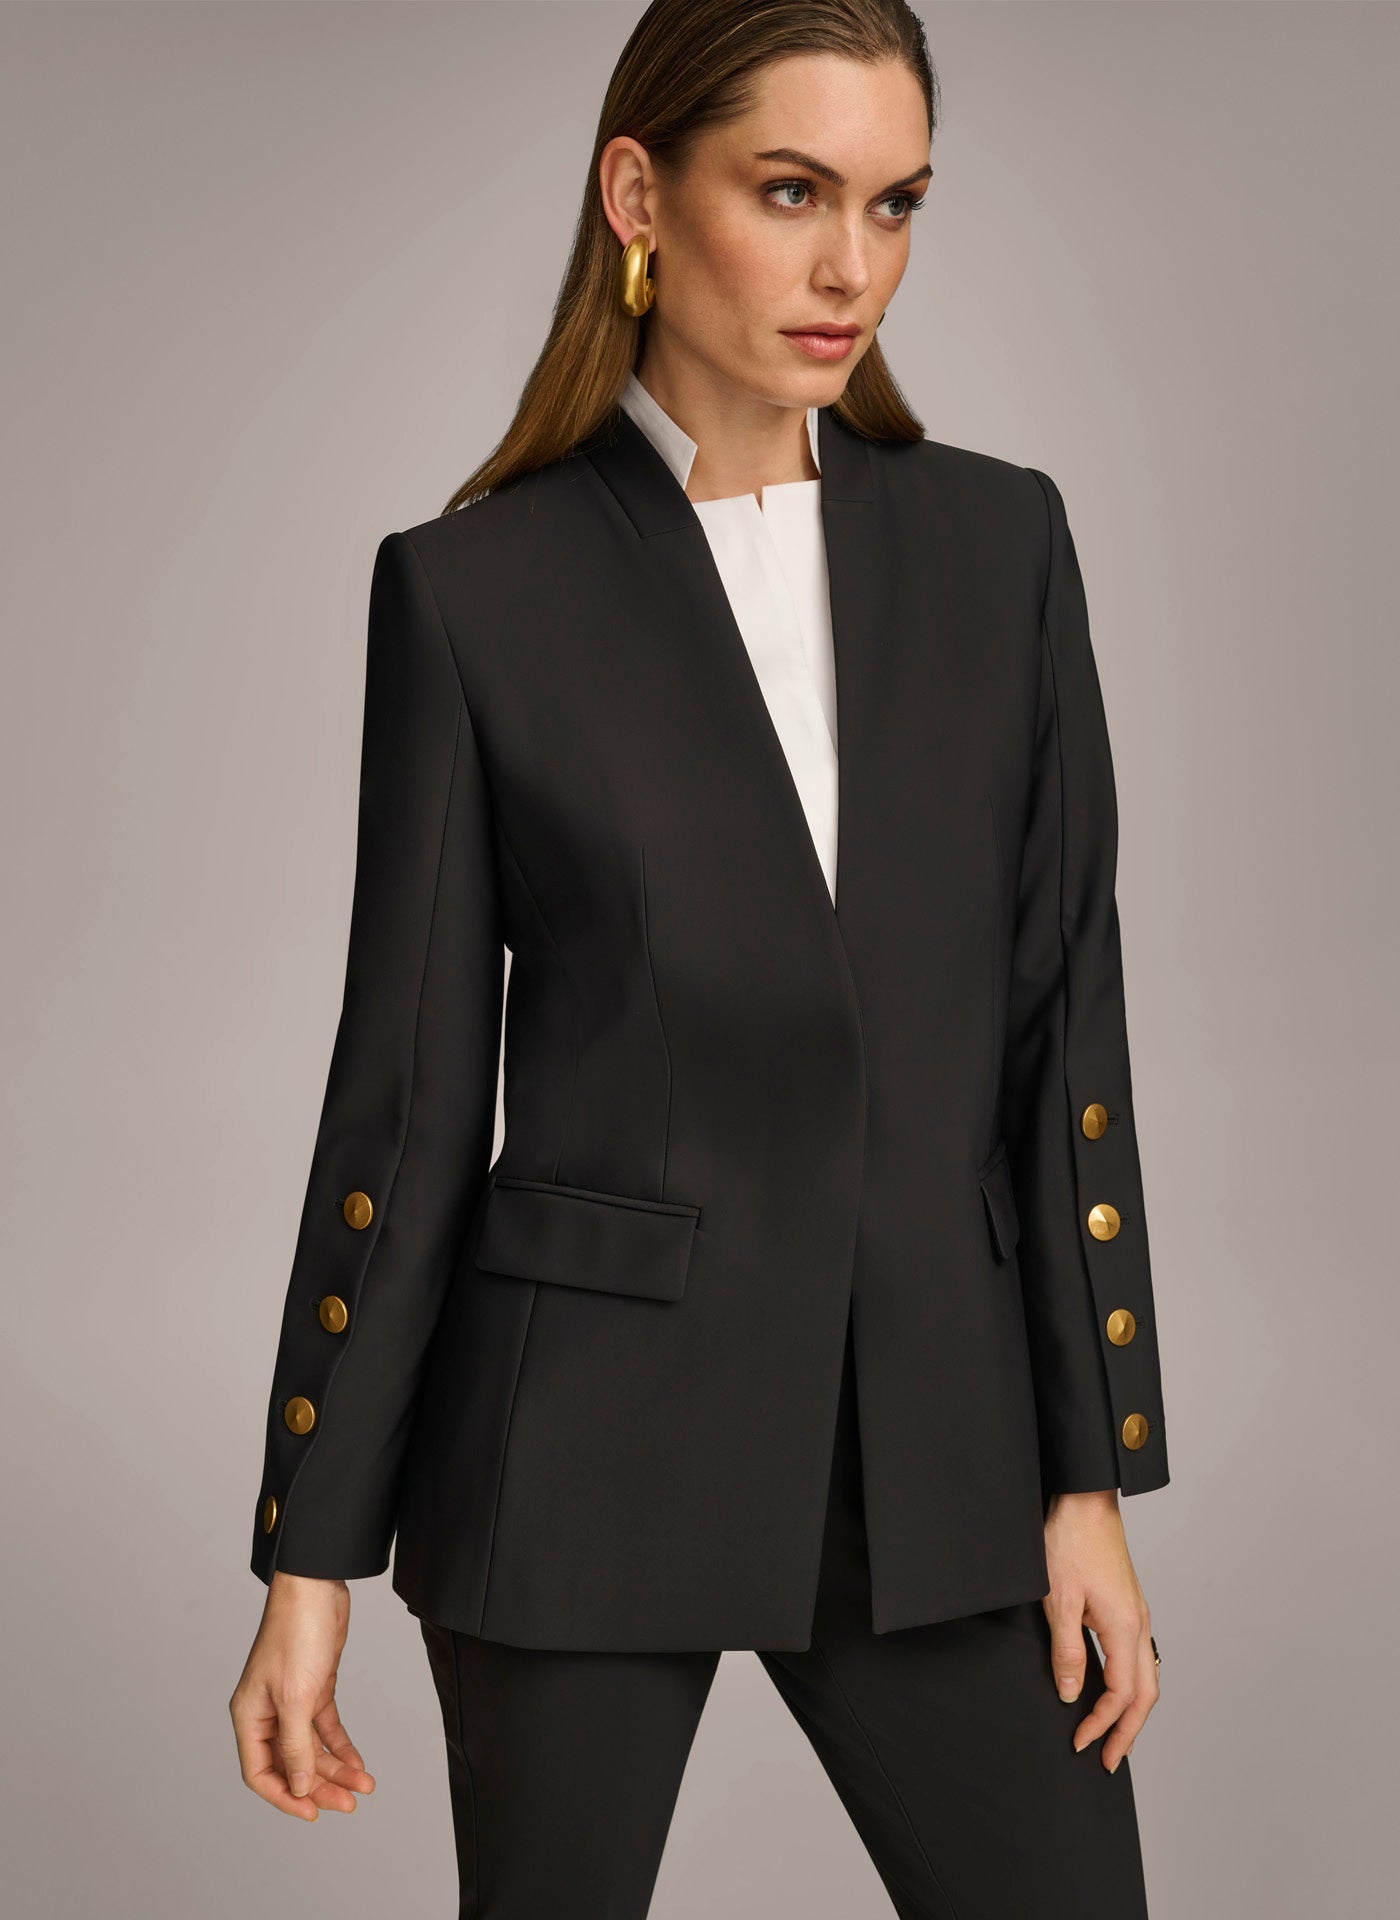 JACKET WITH BUTTON DETAILS ON SLEEVE